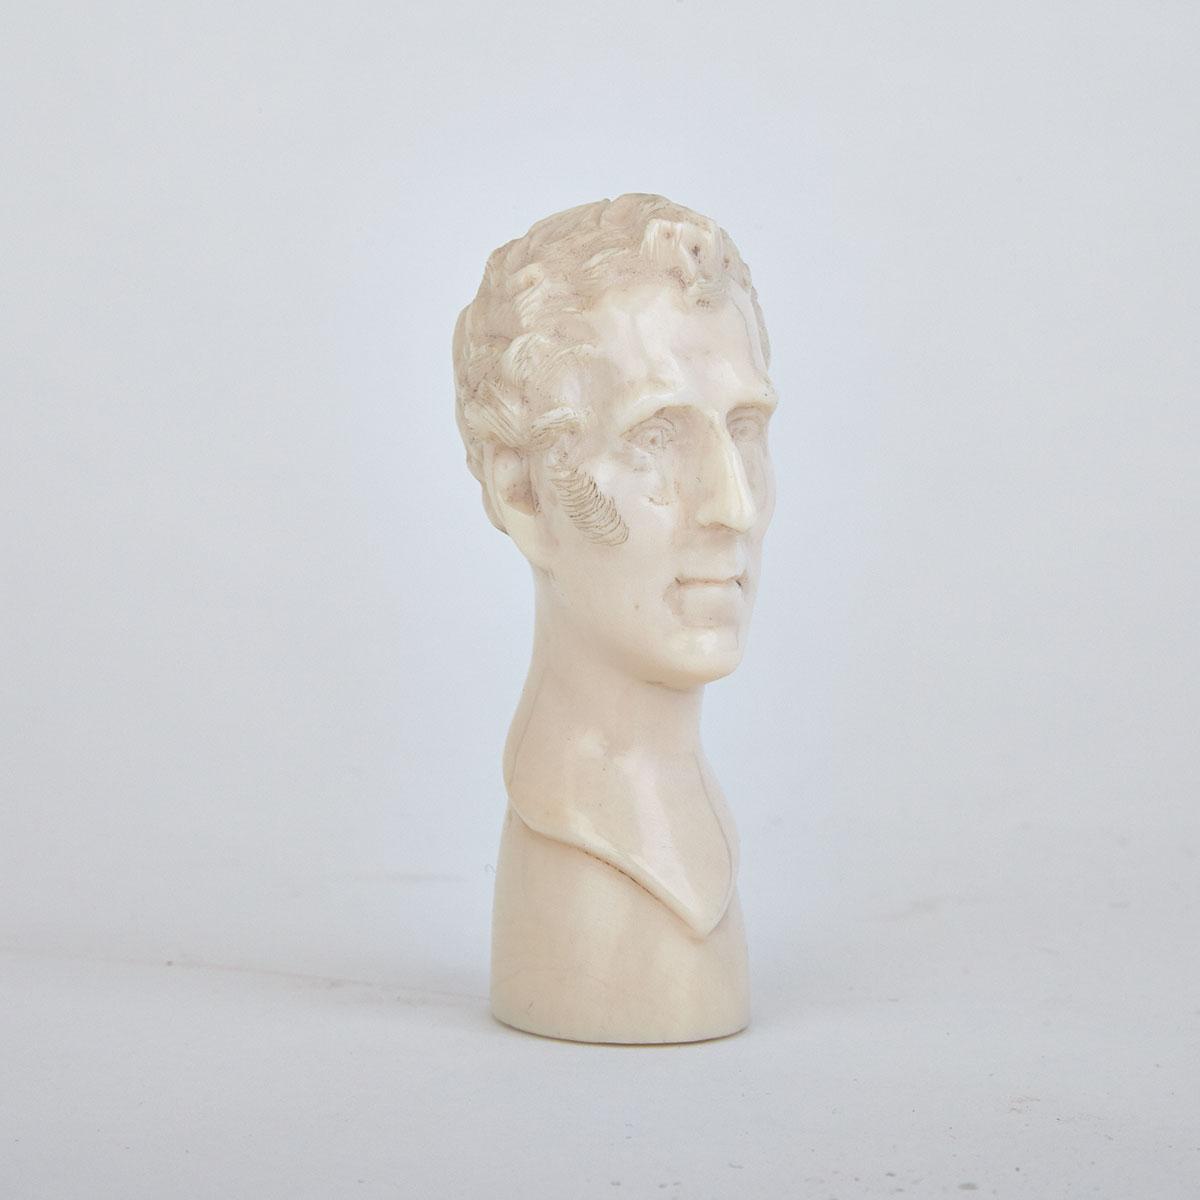 Carved Ivory Cane Handle in the Form of the Head of Arthur Wellesley, 1st Duke of Wellington, early/mid 19th century